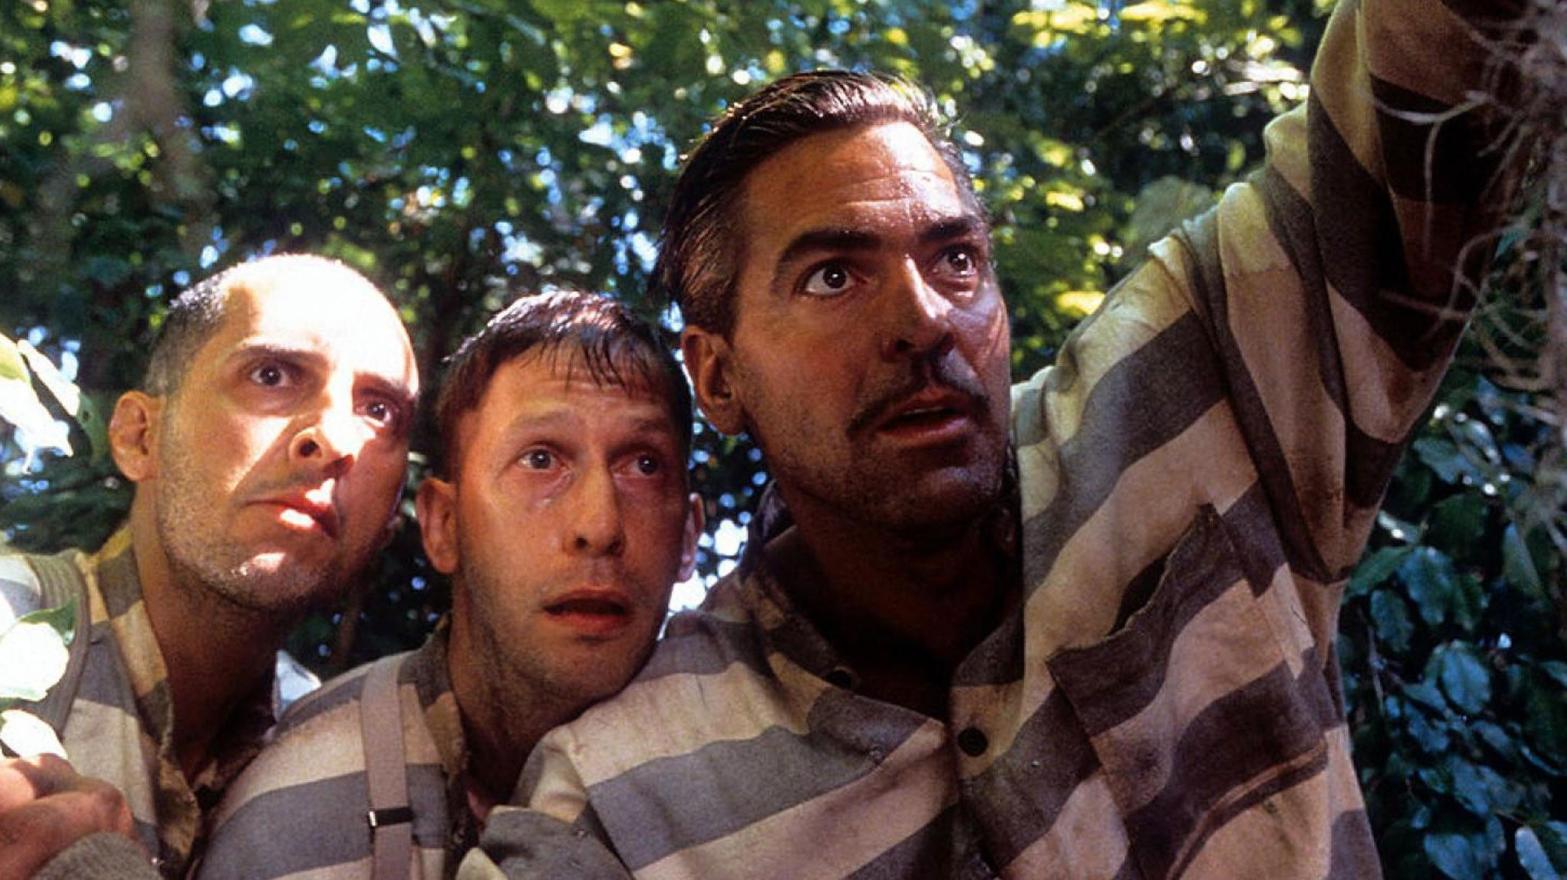 Screenshot: O Brother, Where Art Thou? / Touchstone Pictures